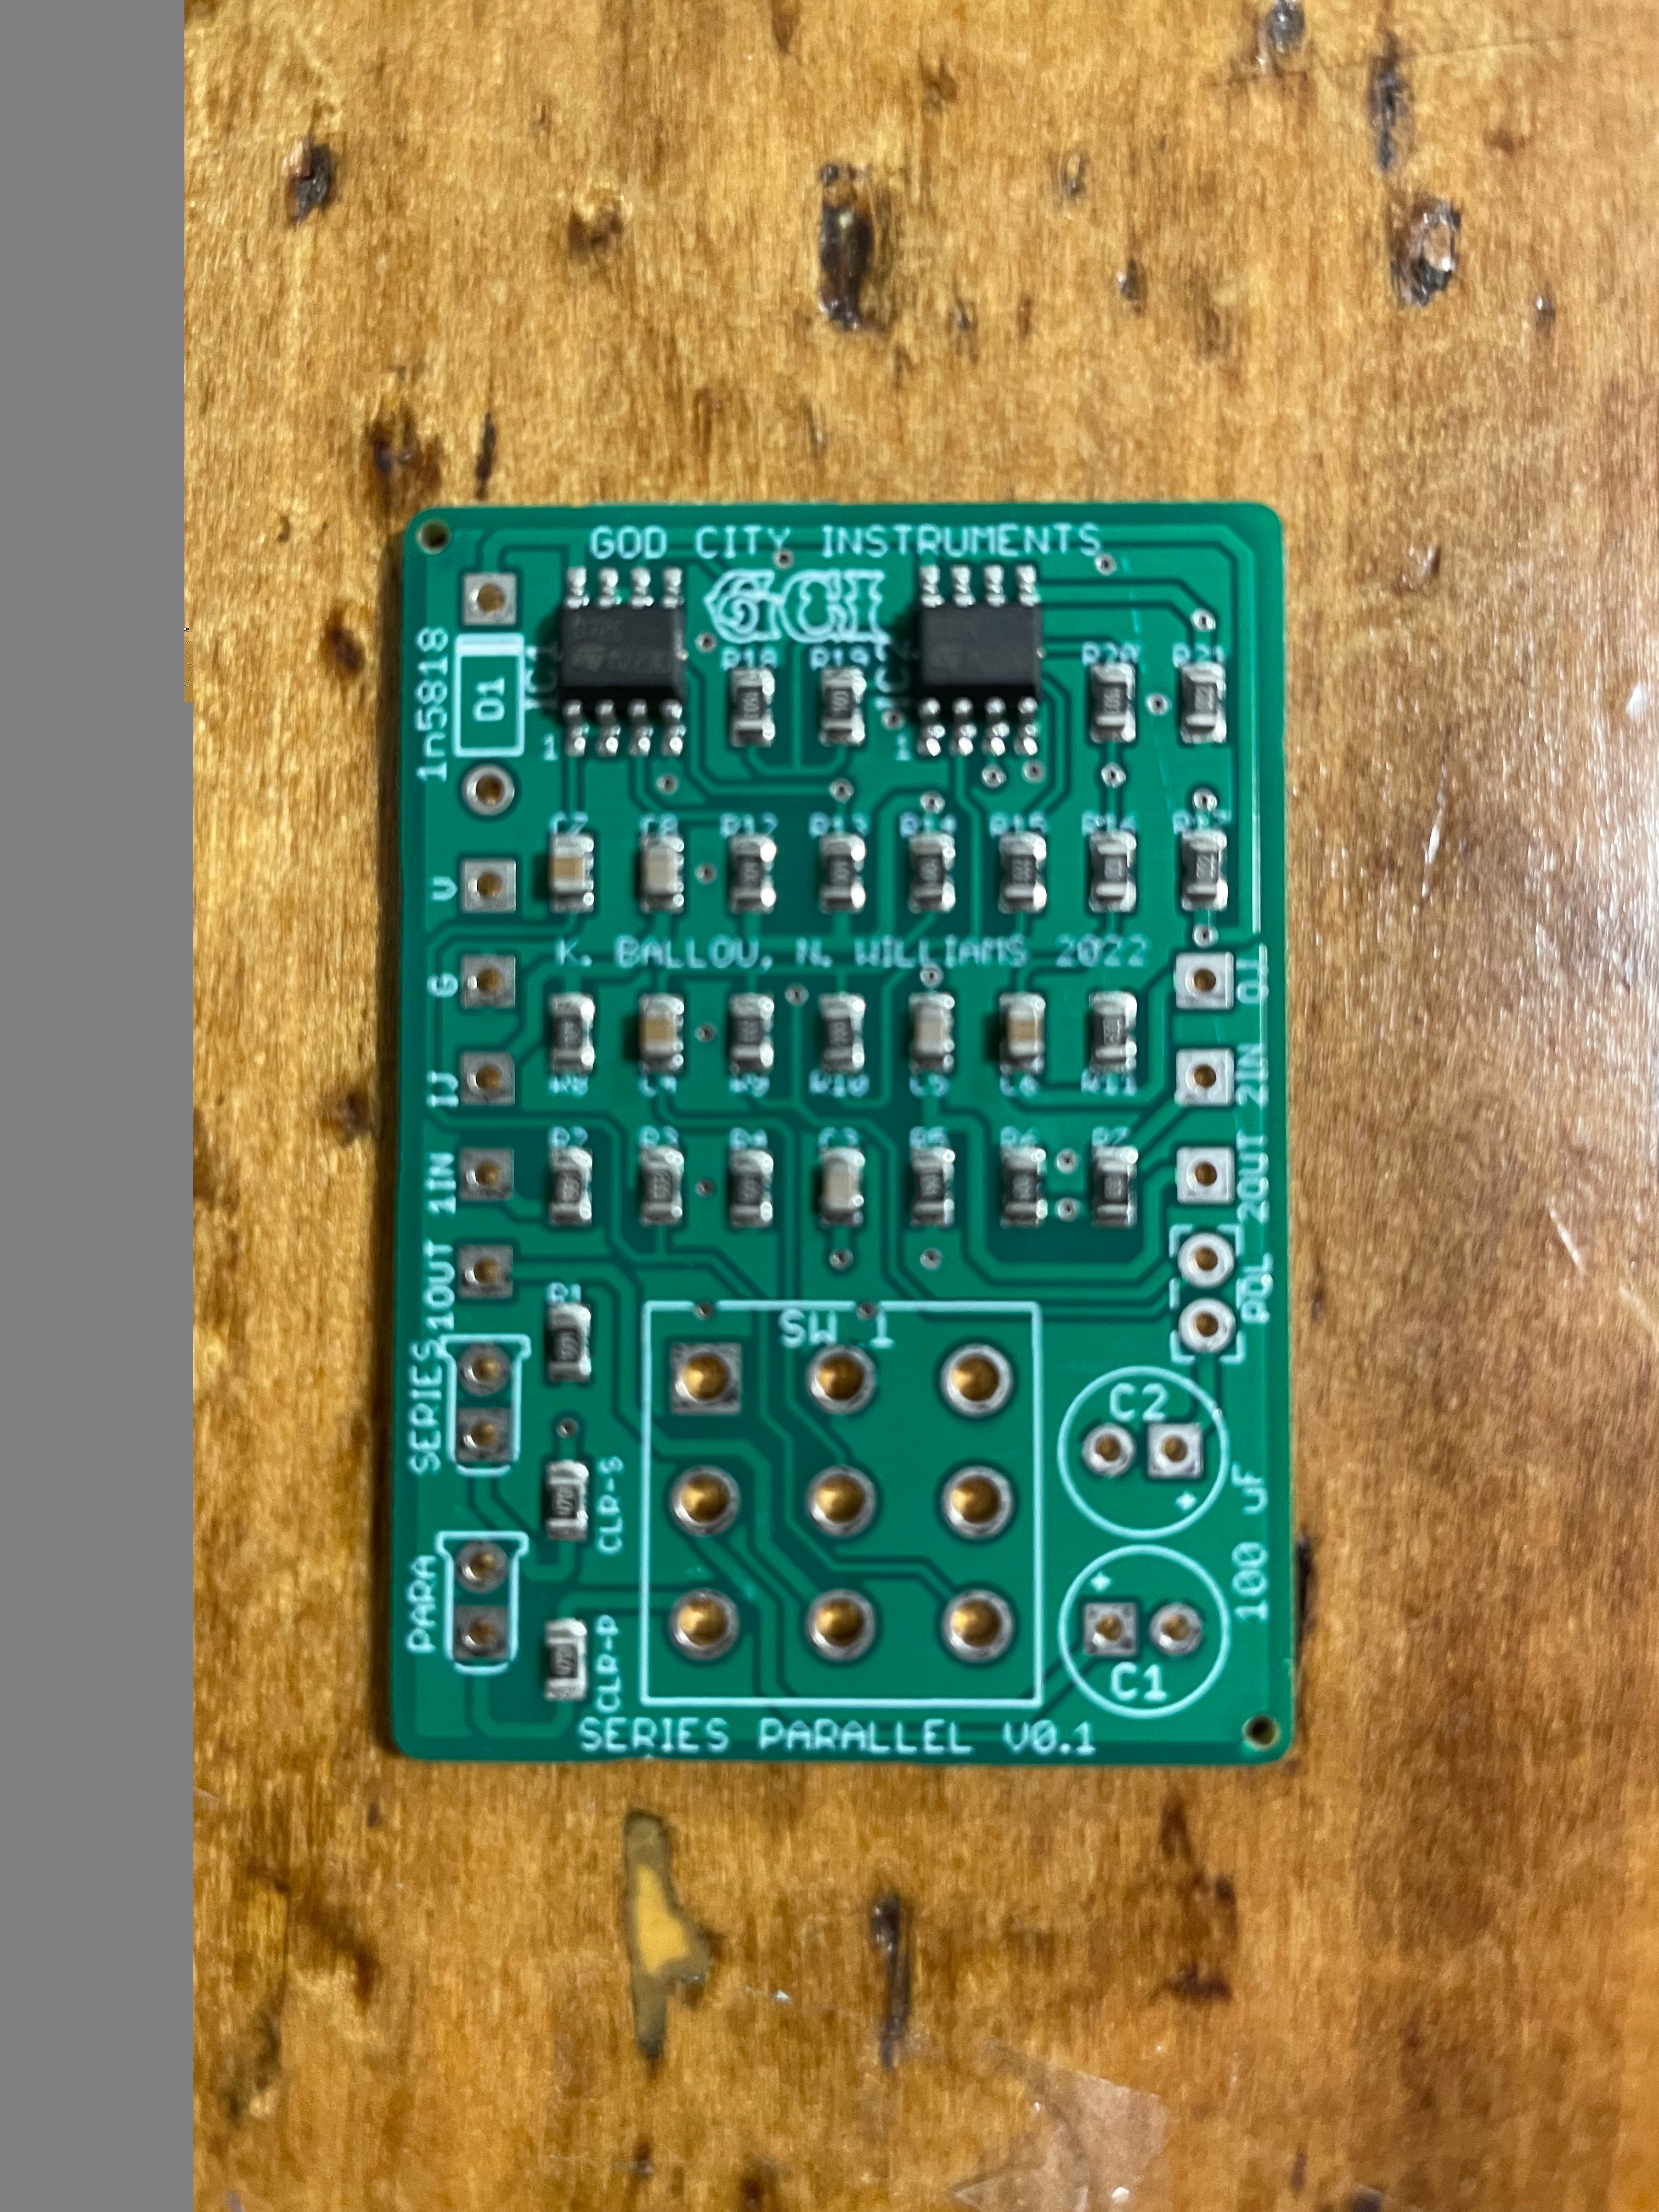 Series Parallel pre-populated DIY PCB